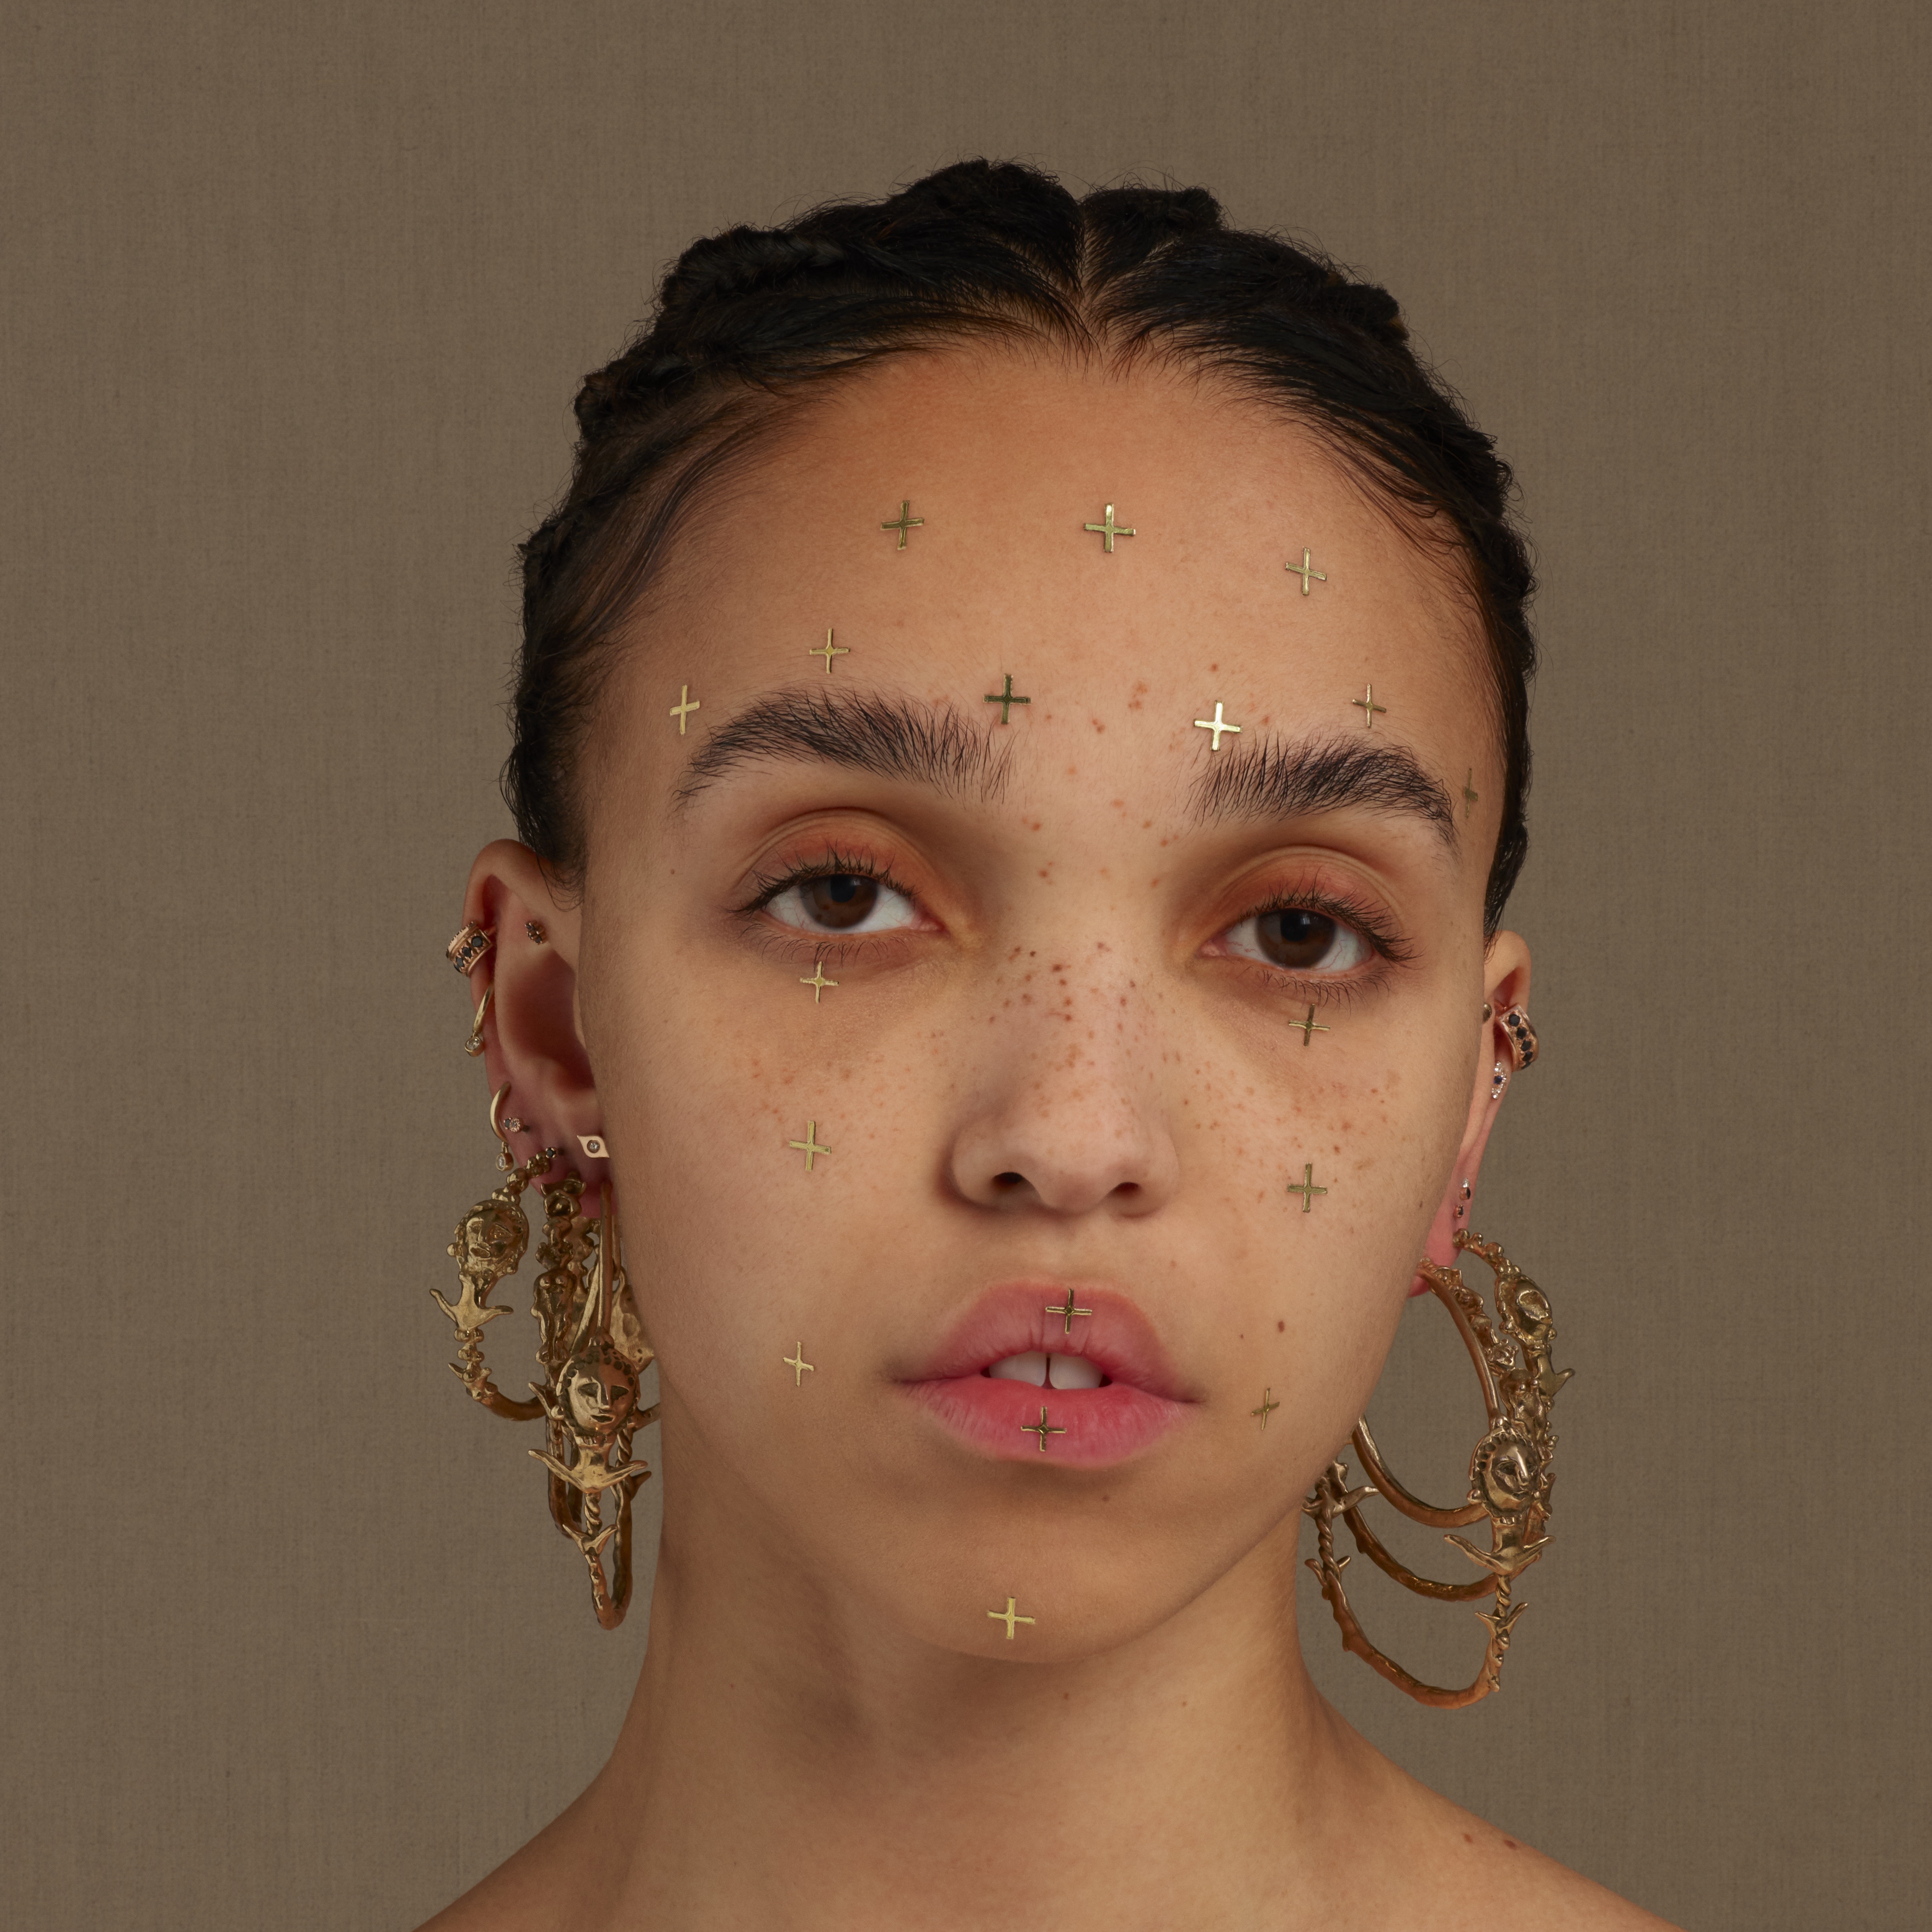 FKA twigs returns today with "Cellophane"